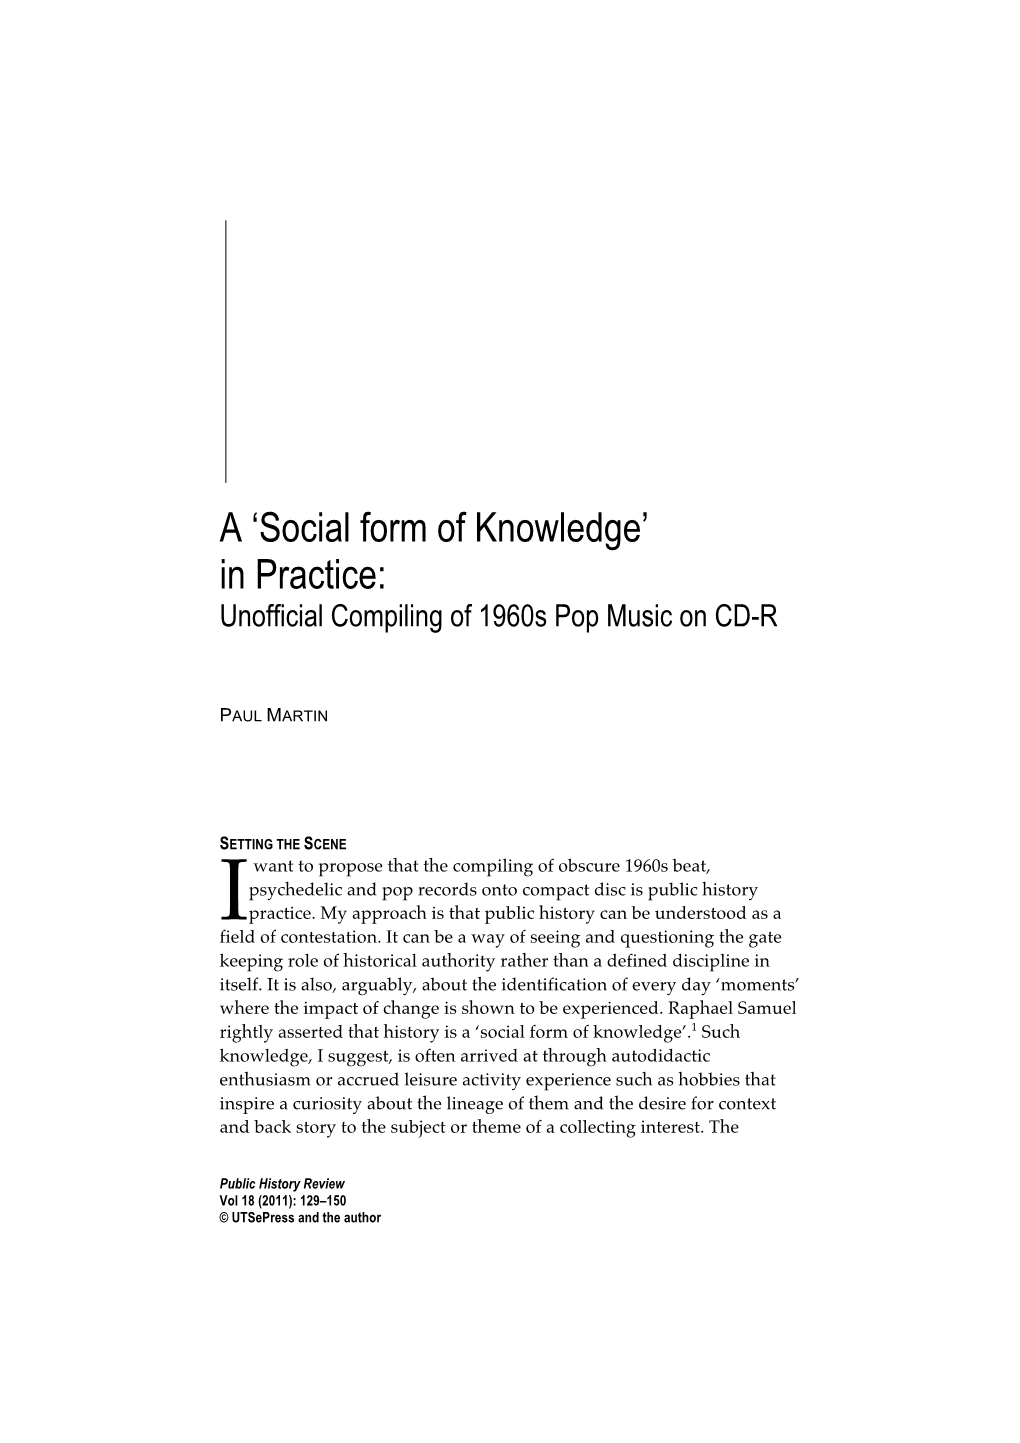 A 'Social Form of Knowledge' in Practice